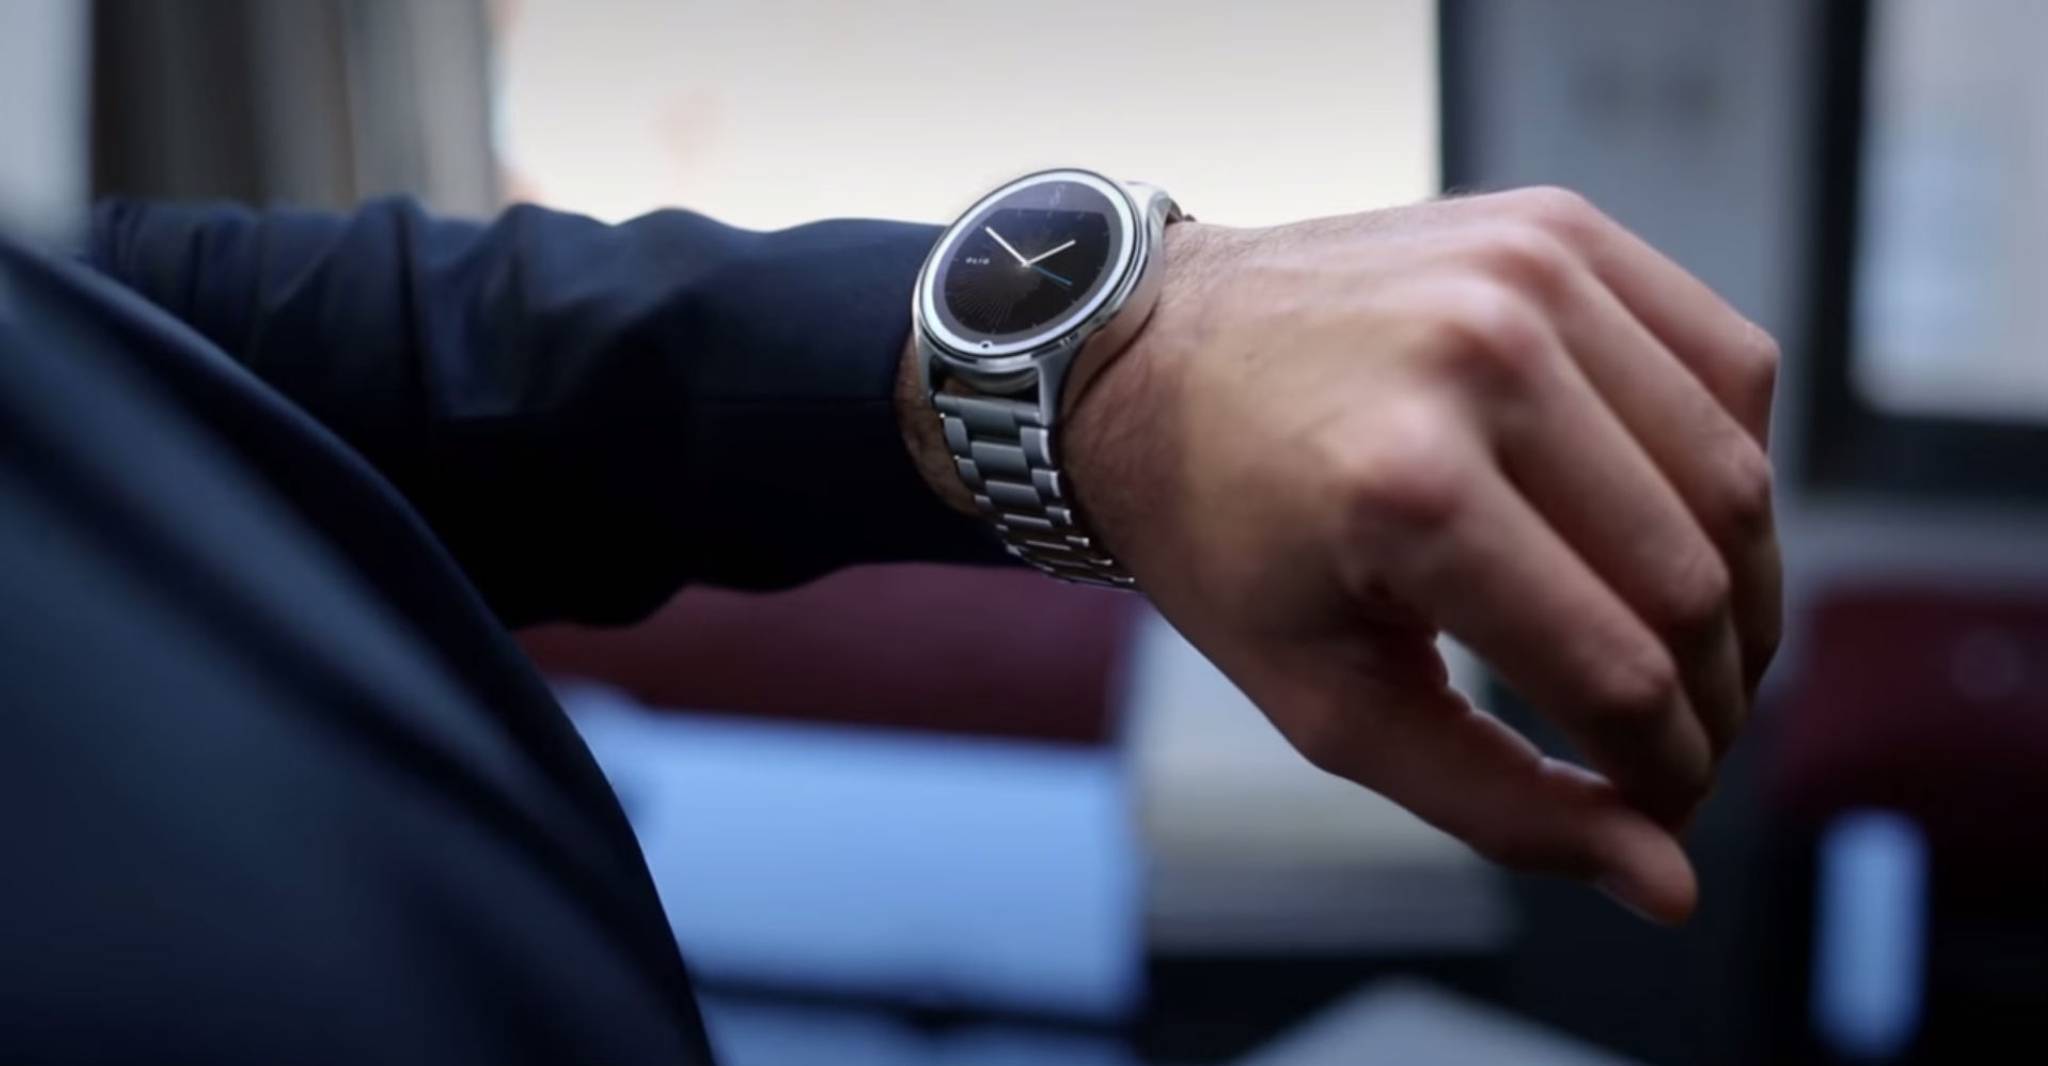 The smartwatch that's moved beyond apps